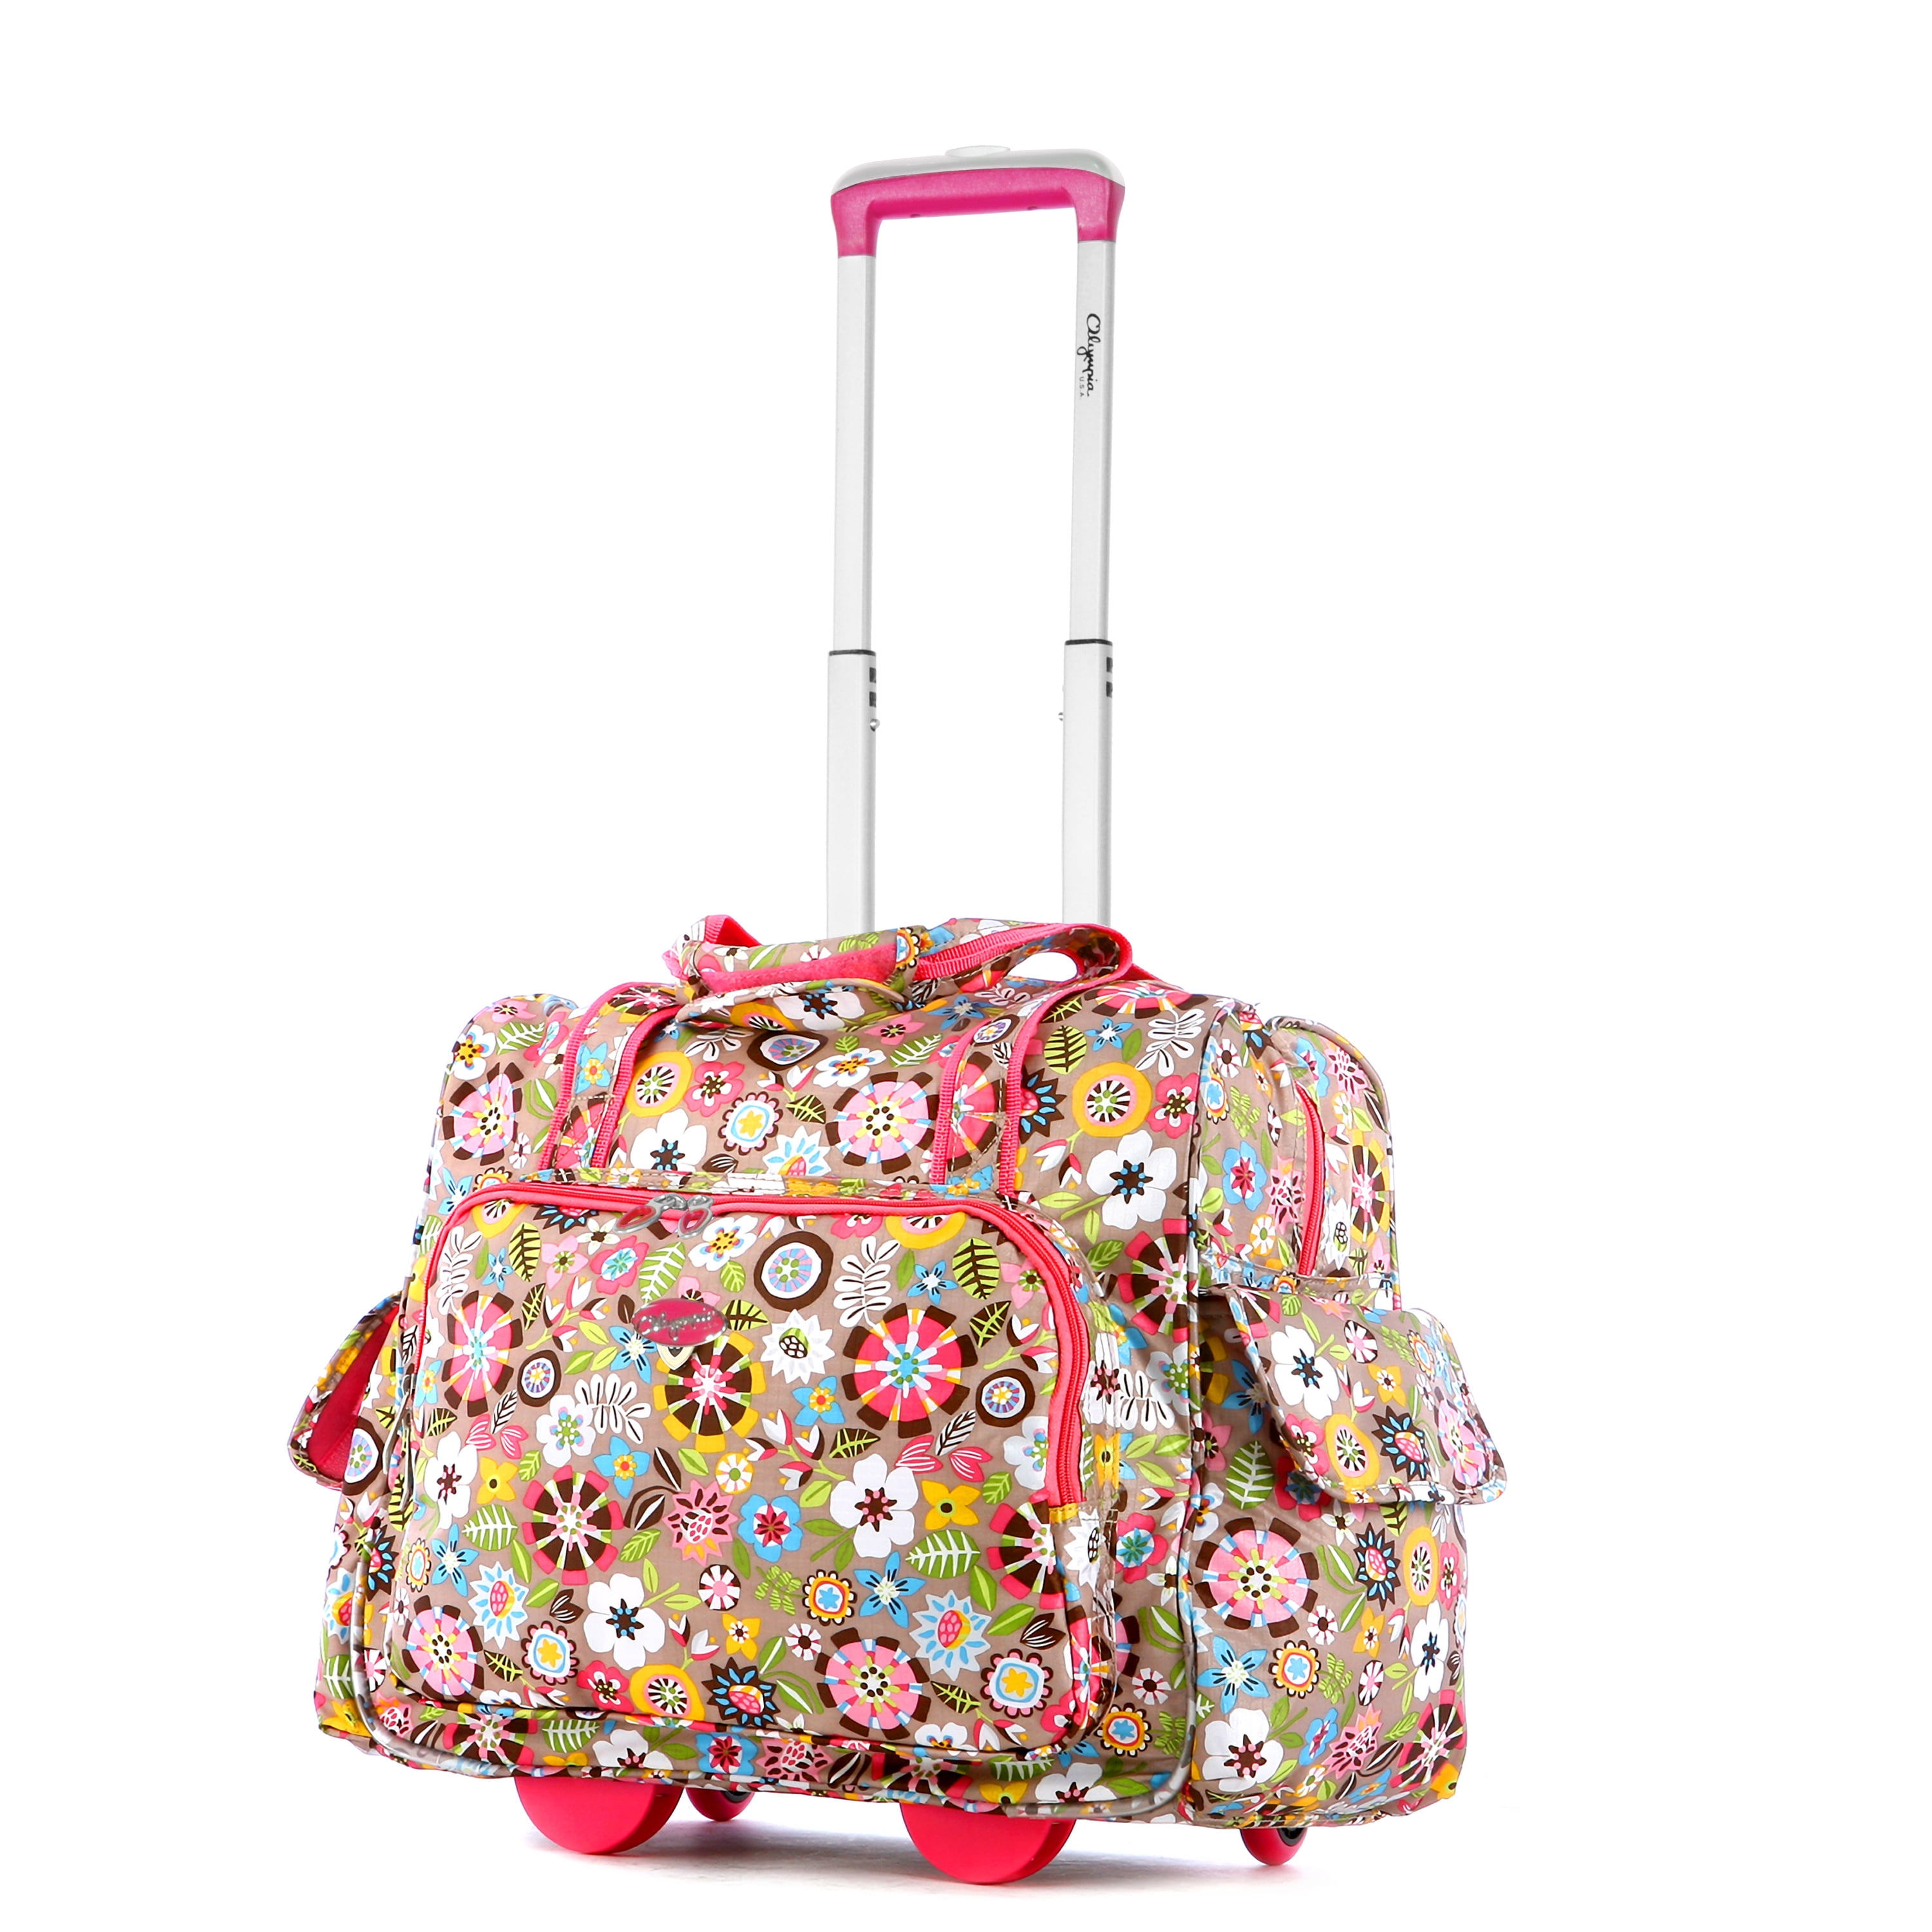 Deluxe Fashion Rolling Overnighter. RT-3400, polyester, ripstop, blue,  pink, pattern, paisley